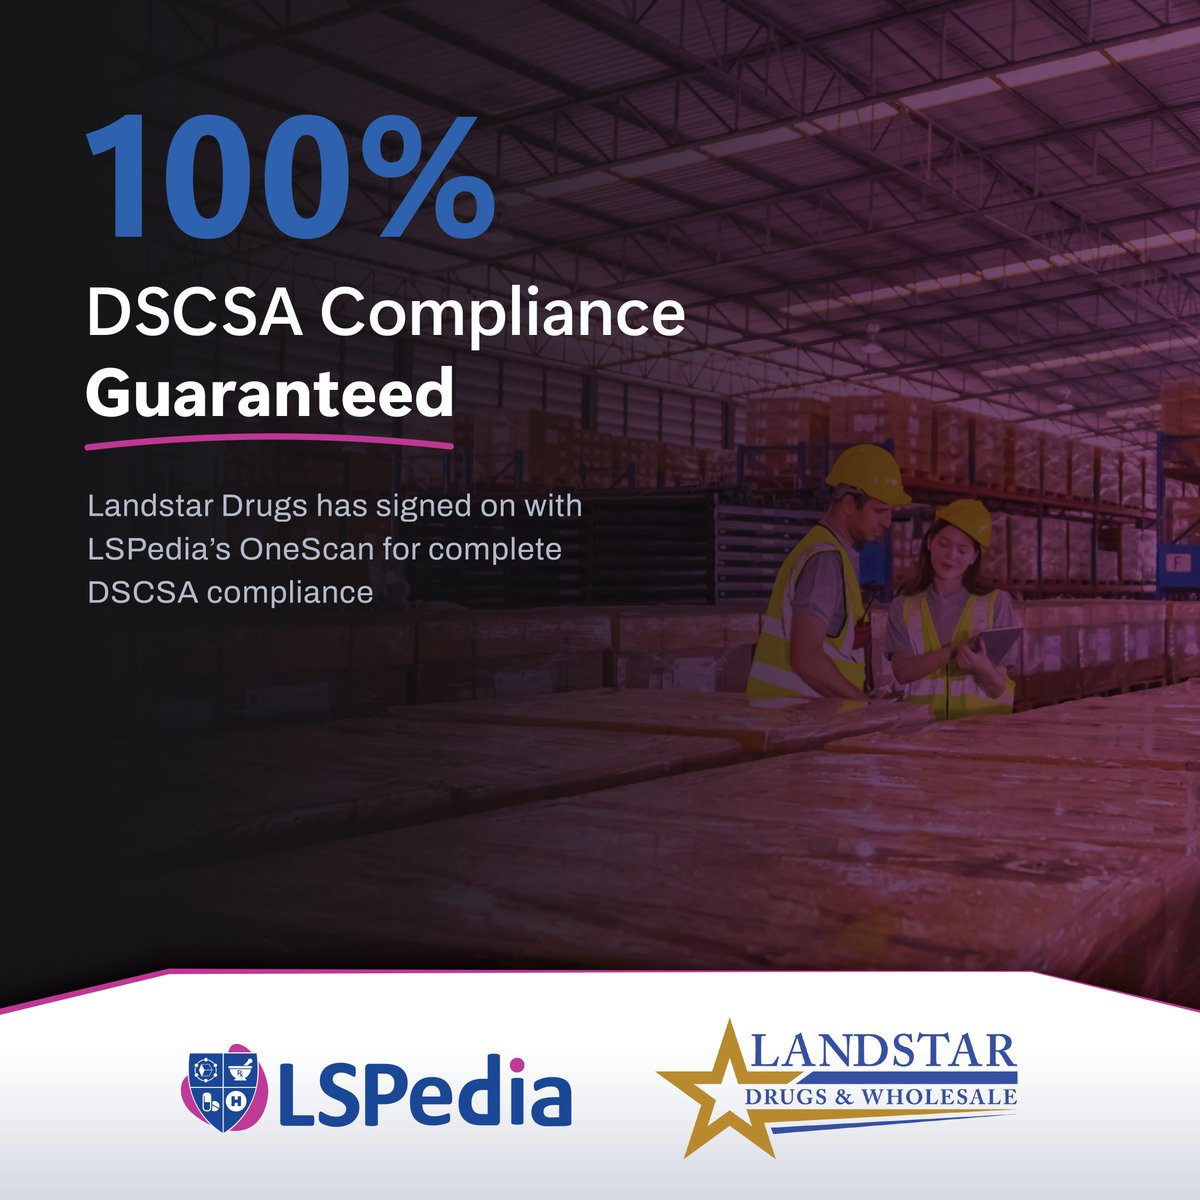 We’re proud to congratulate Landstar Drugs & Wholesale on their launch! Running #OneScan, the #1 #DSCSA compliance solution in the industry, Landstar delivers 100% DSCSA compliance from day 1.

#supplychain #trackandtrace #wholesaler